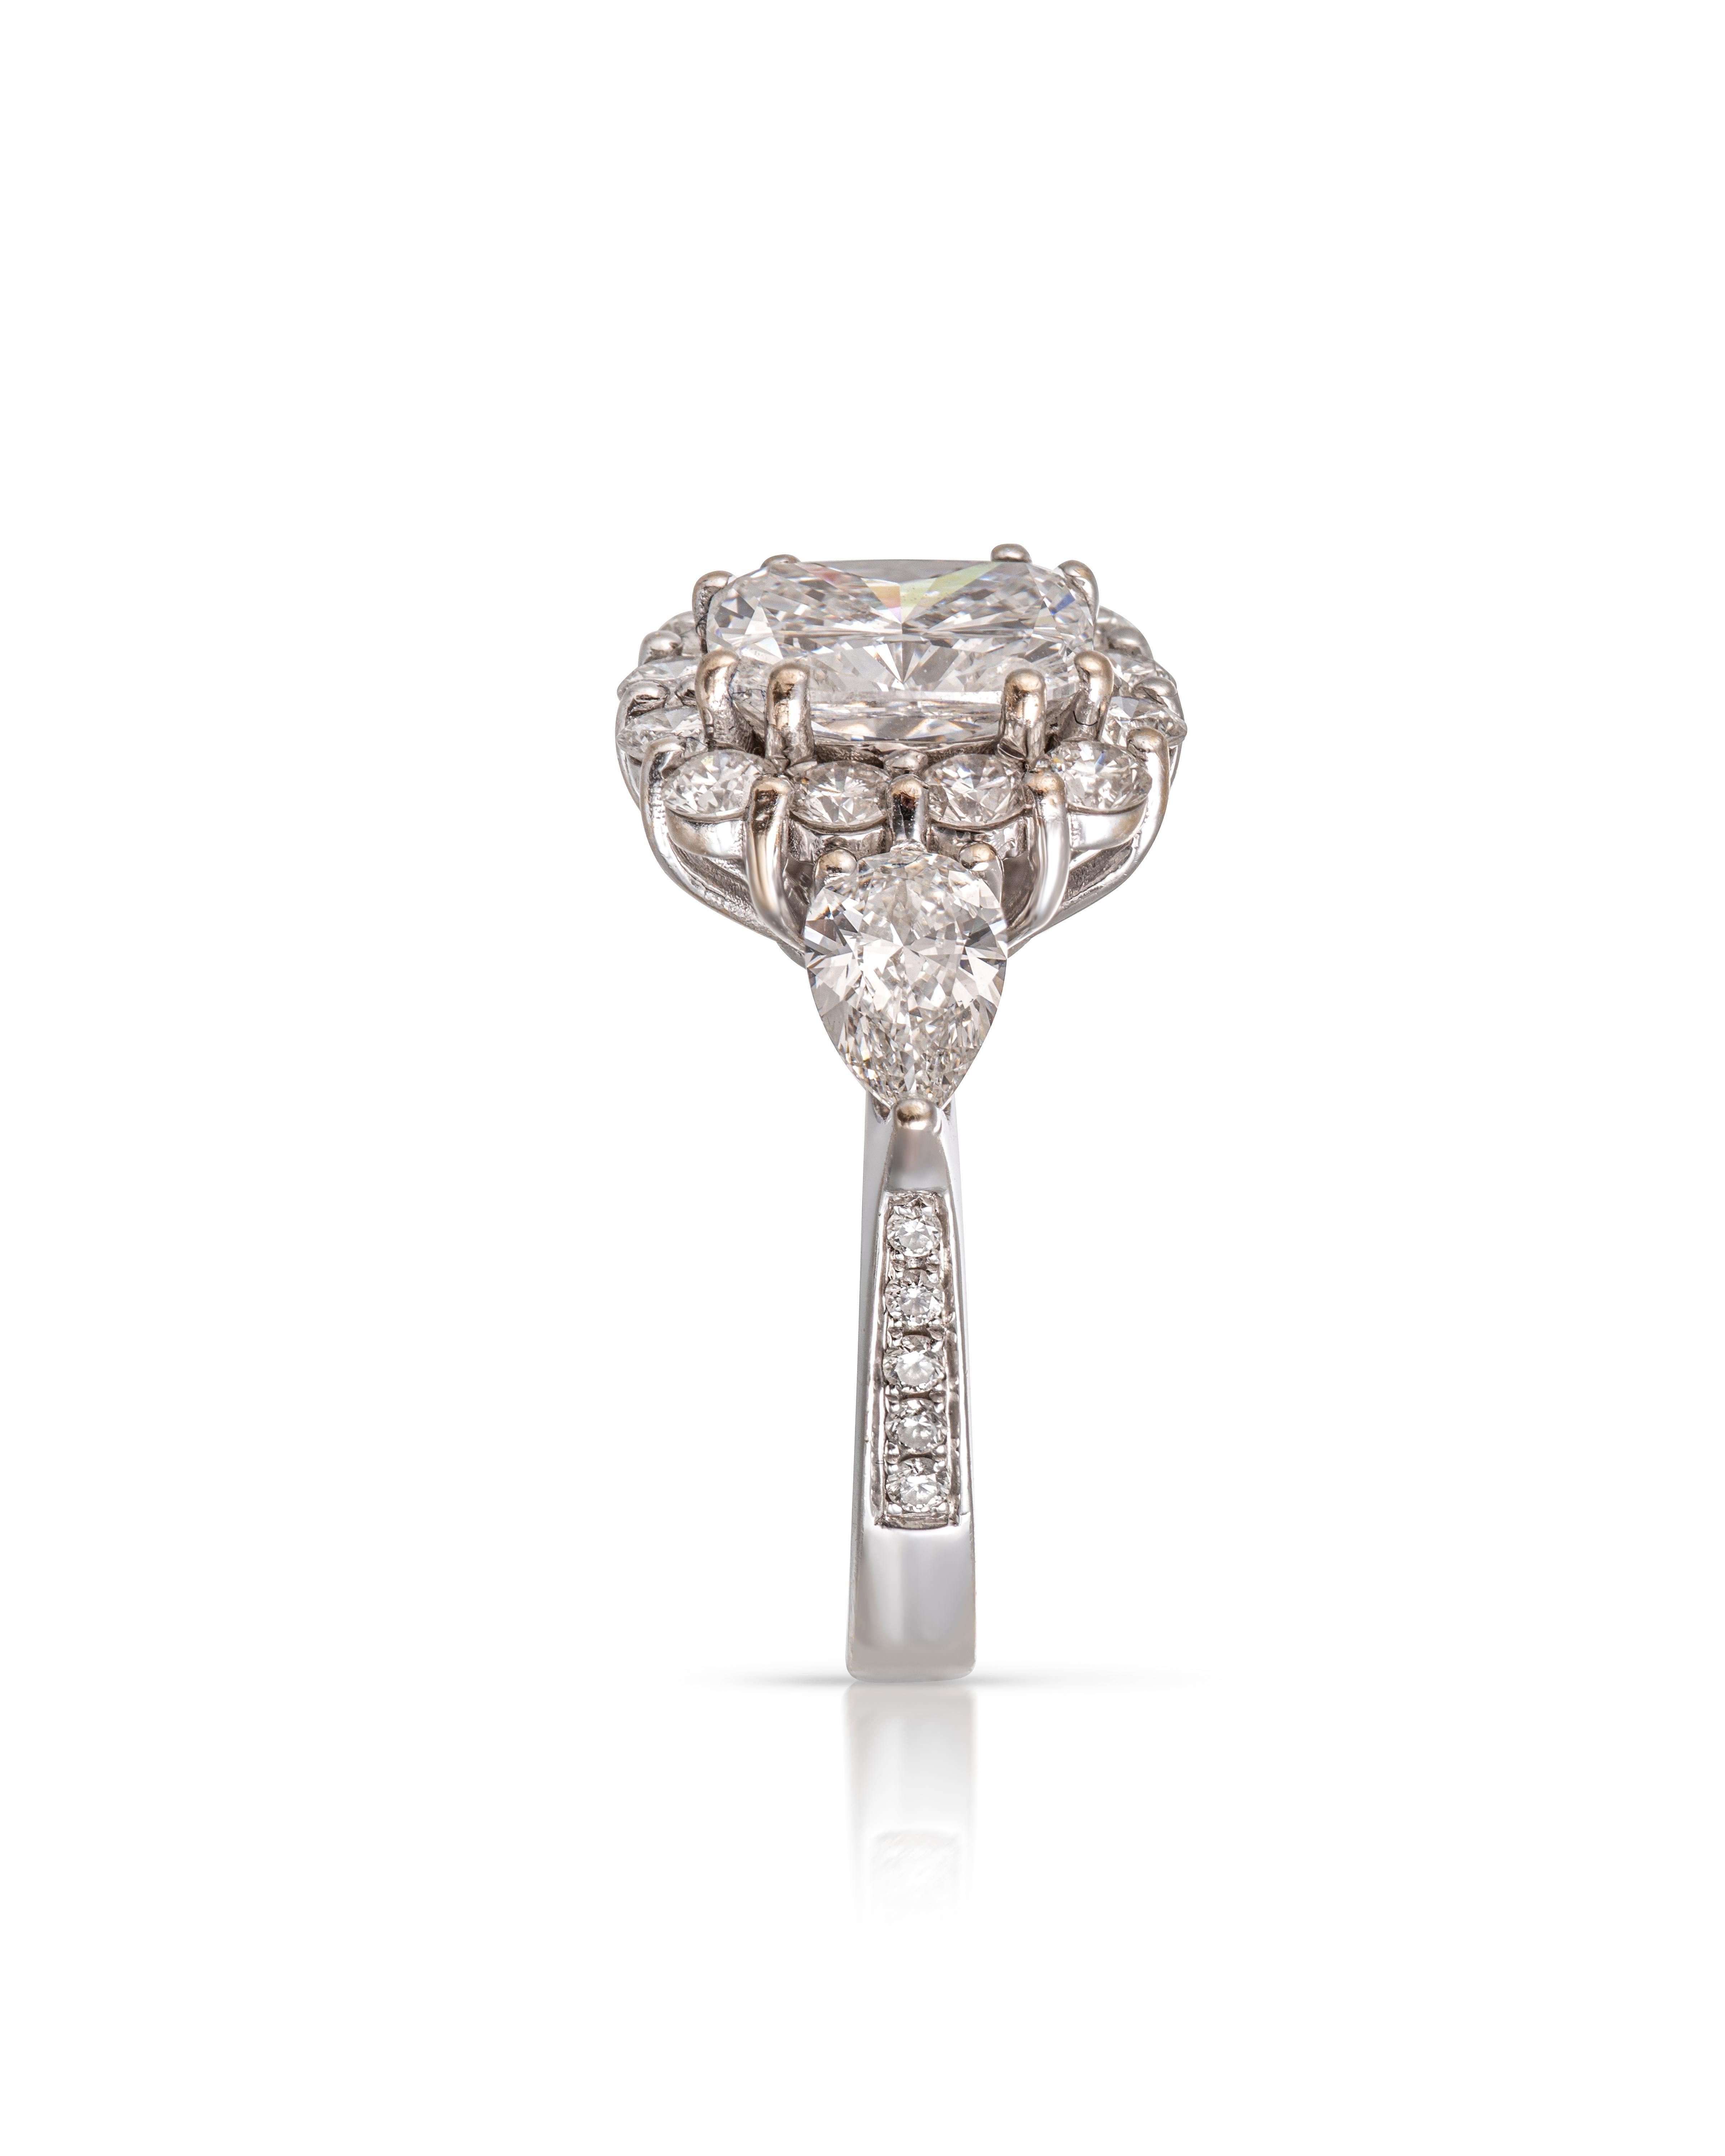 GIA Certified 2.5 carat D Colour and Internally Flawless Cushion Cut Diamond ring
A gorgeous Gia Certified 2.5ct D colour and Internally flawless cushion shaped diamond. The main diamond is set within a diamond cluster setting which is further